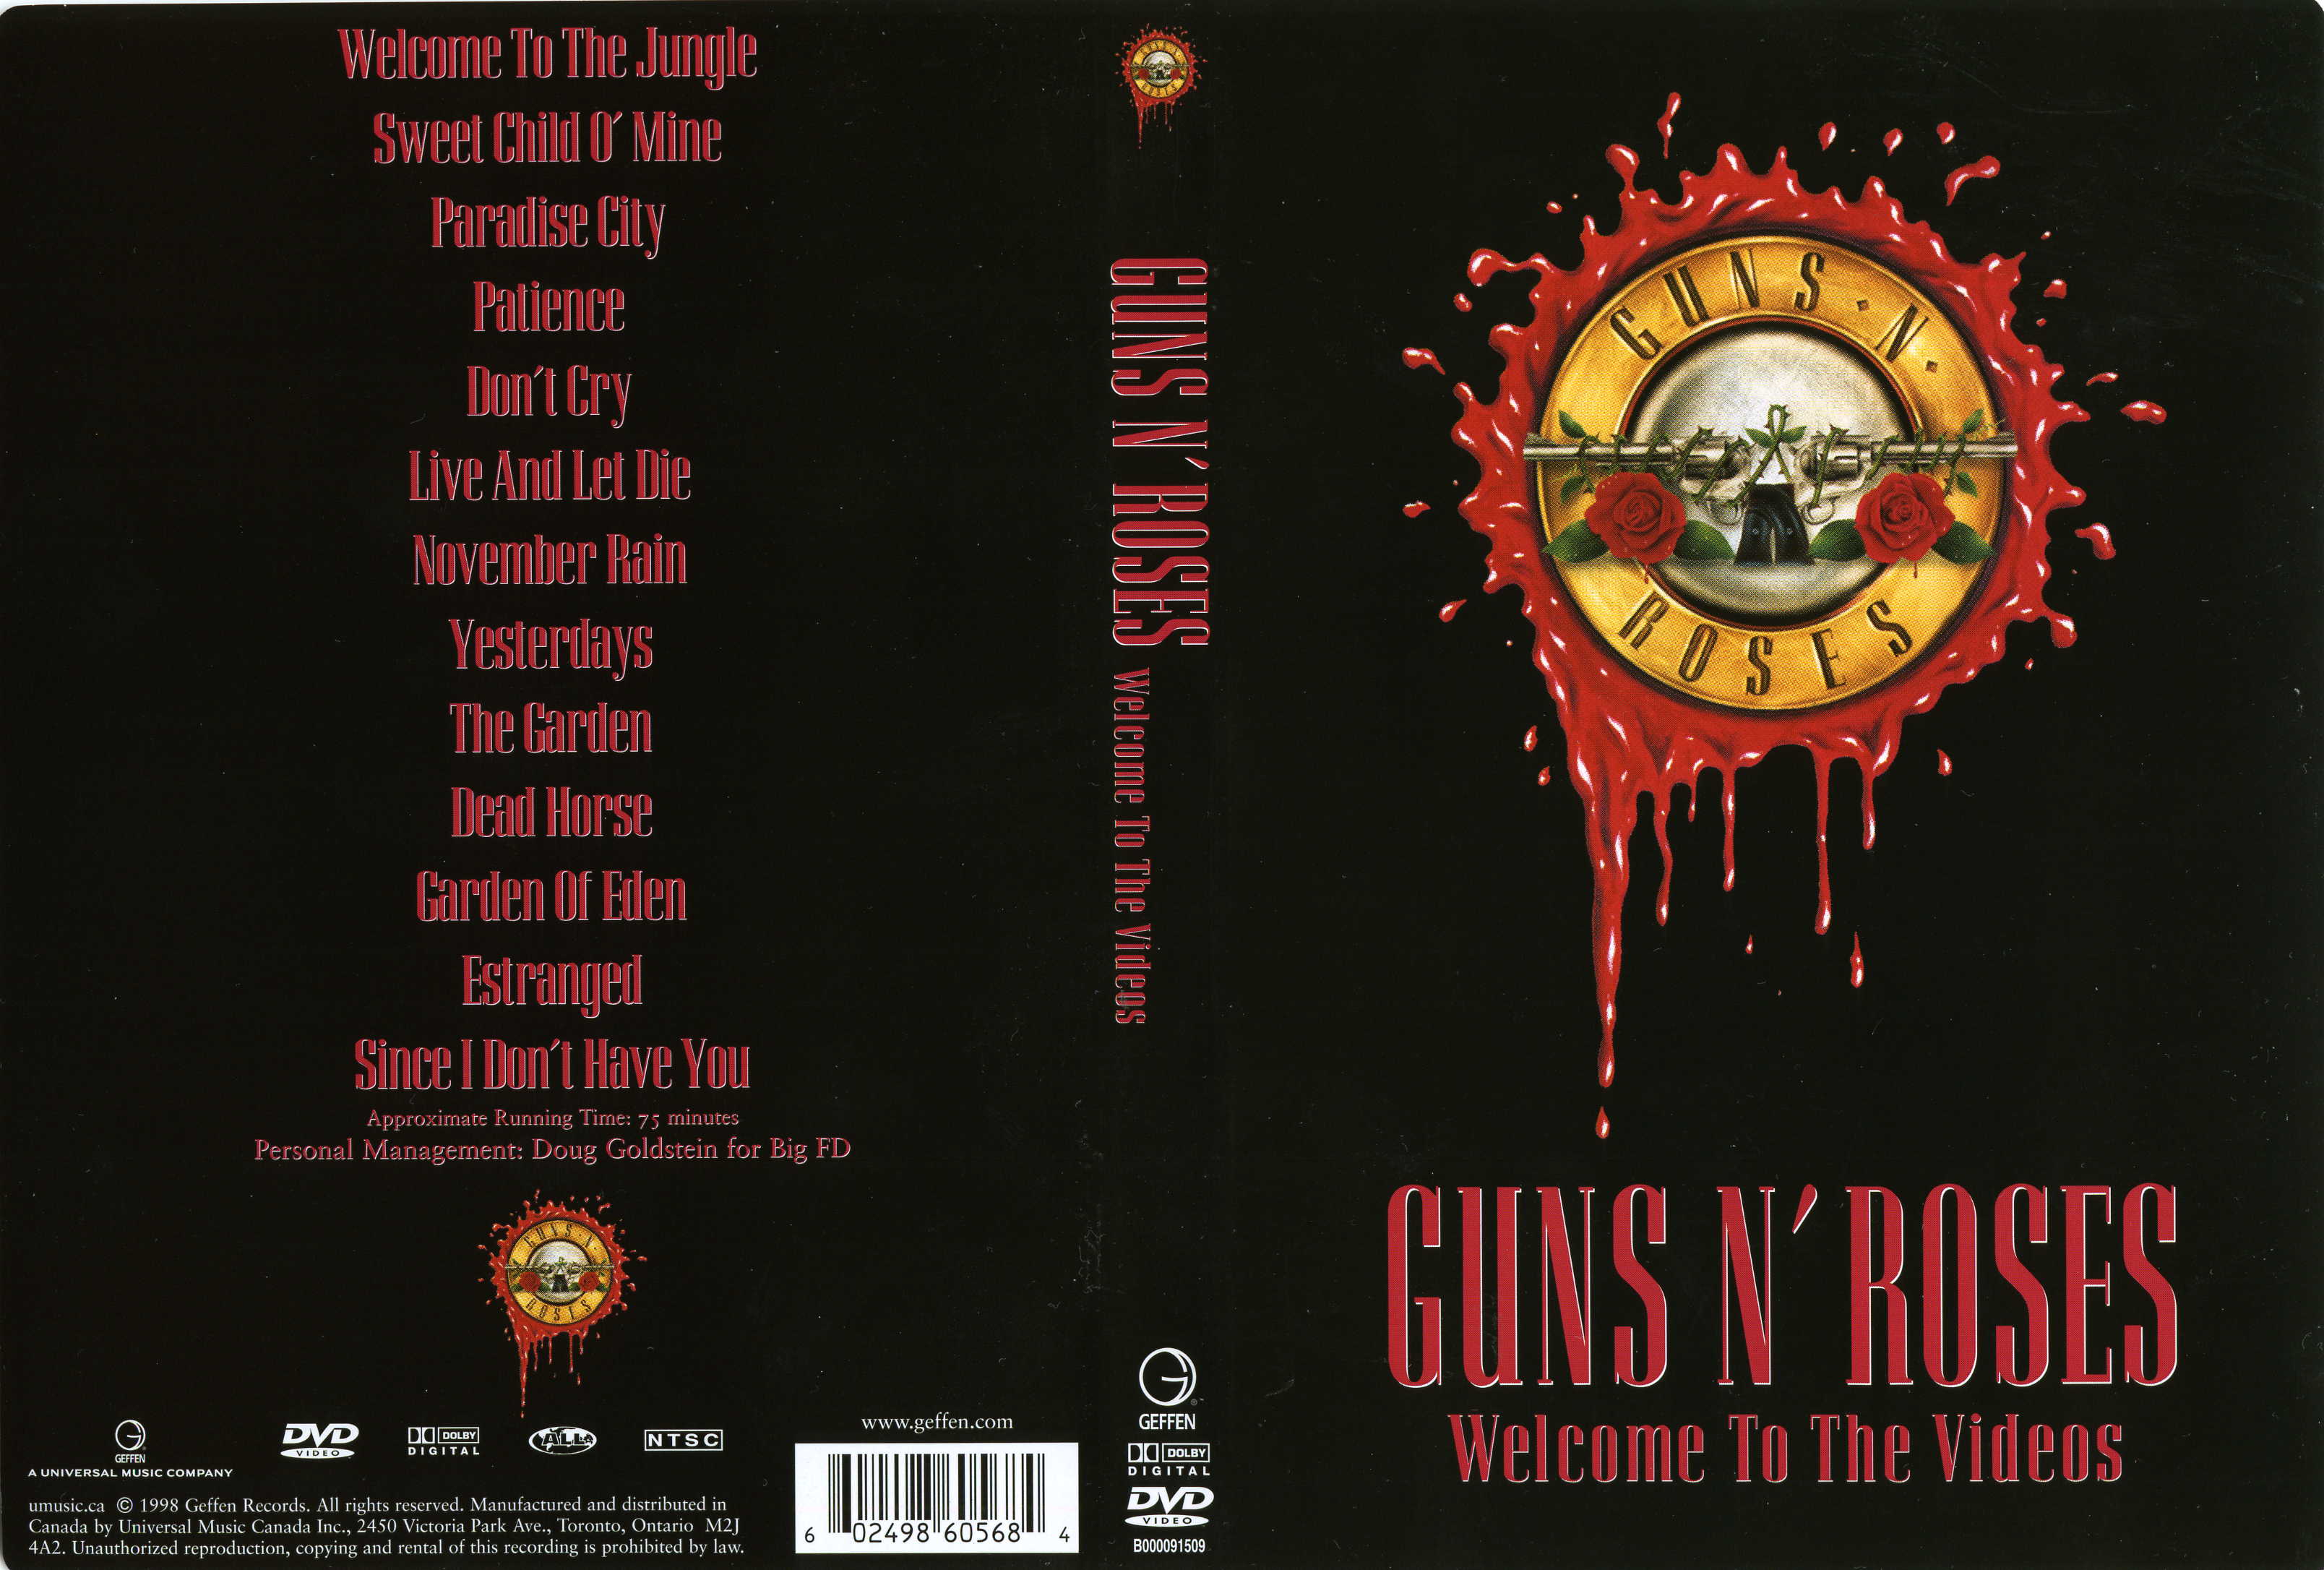 Jaquette DVD Guns N Roses - Welcome to the videos